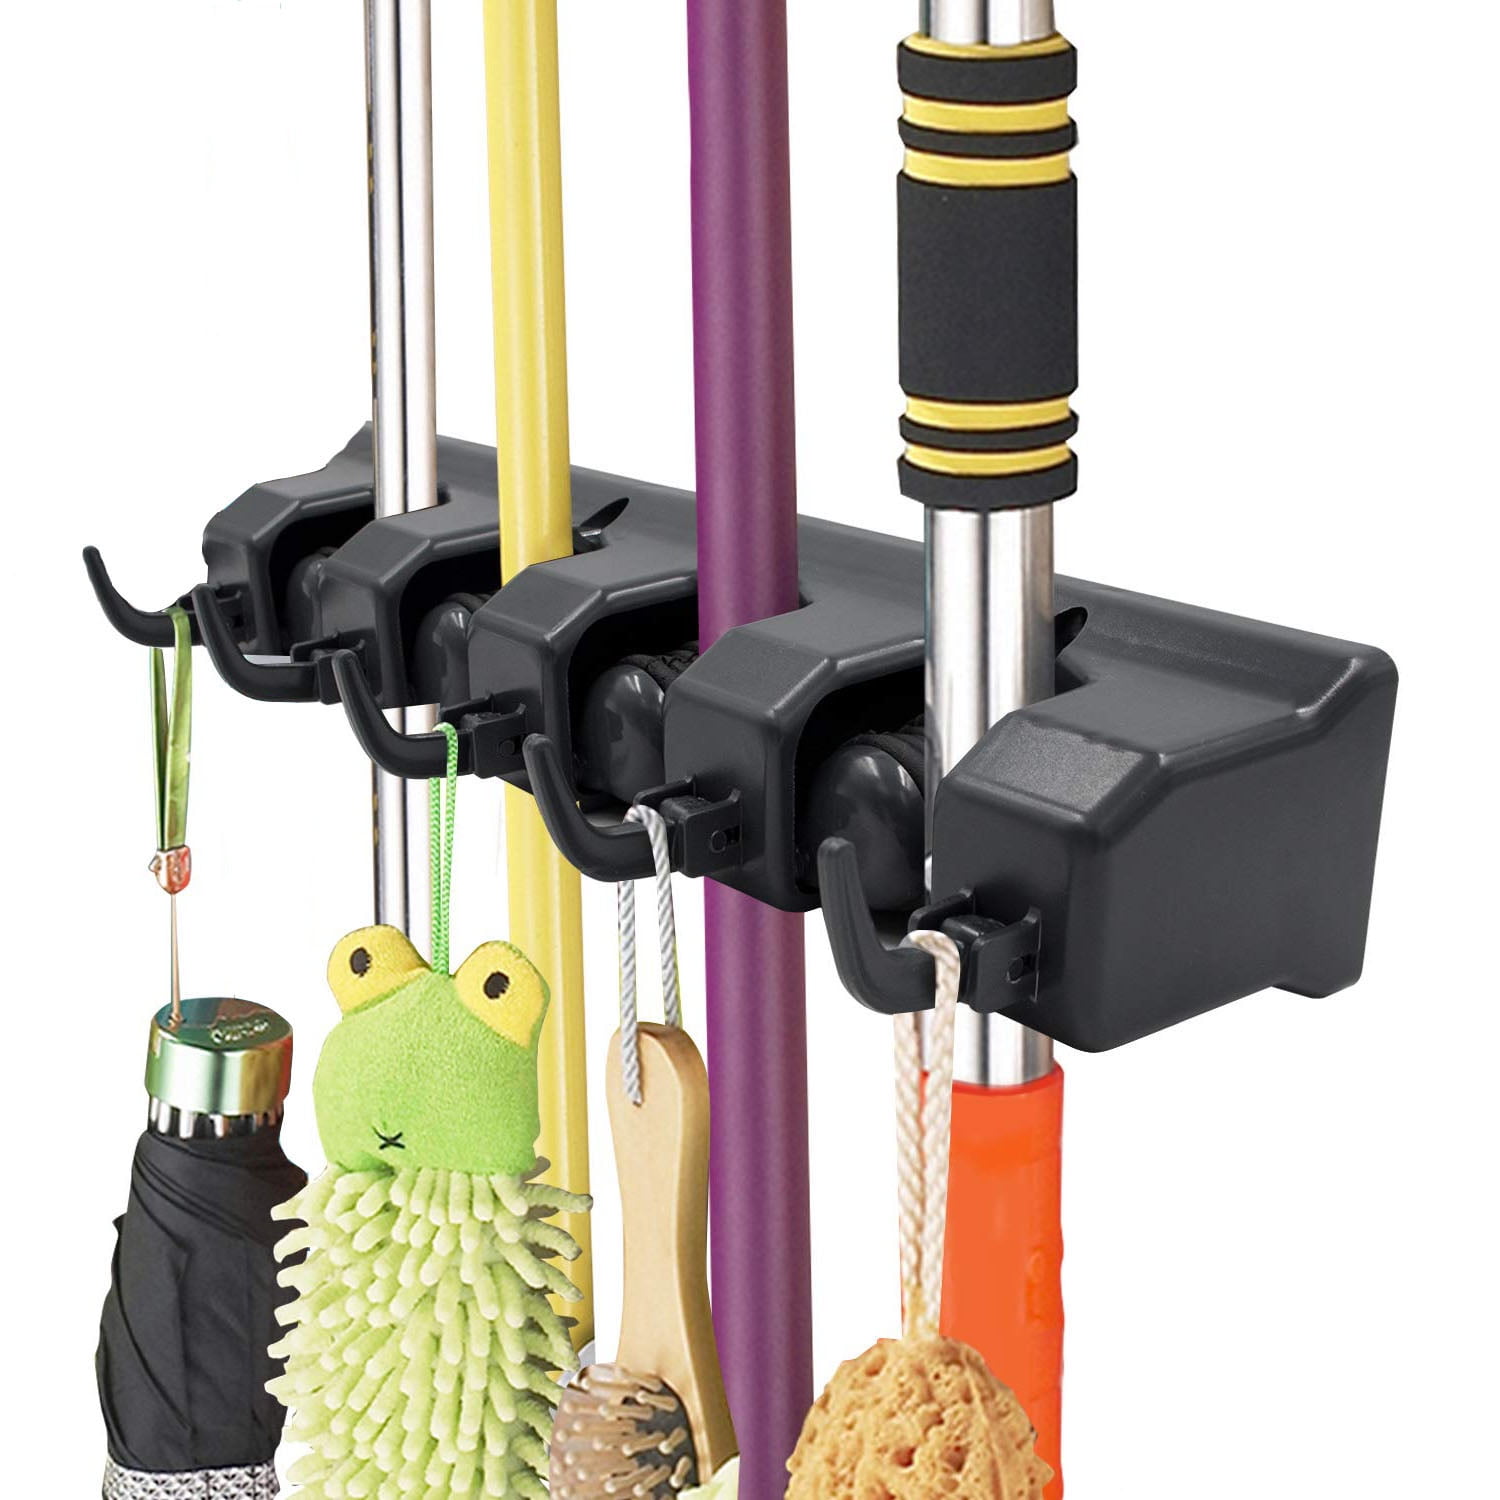 2-in-1 Wall Mounted Mop and' Broom Rack Holder Hanger Organizer with 6 Hooks